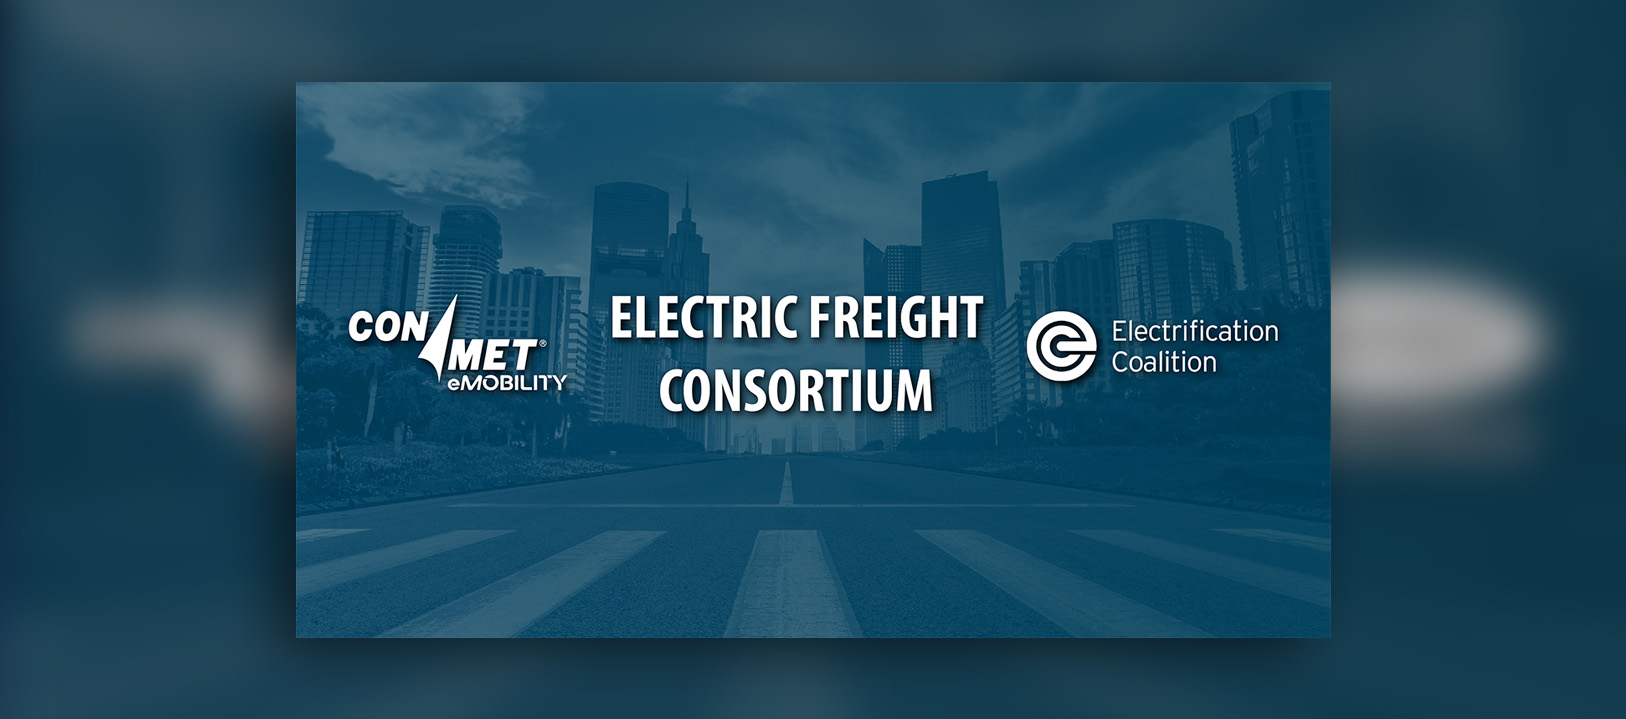 Industry Leaders Join Together to Advance Freight Electrification